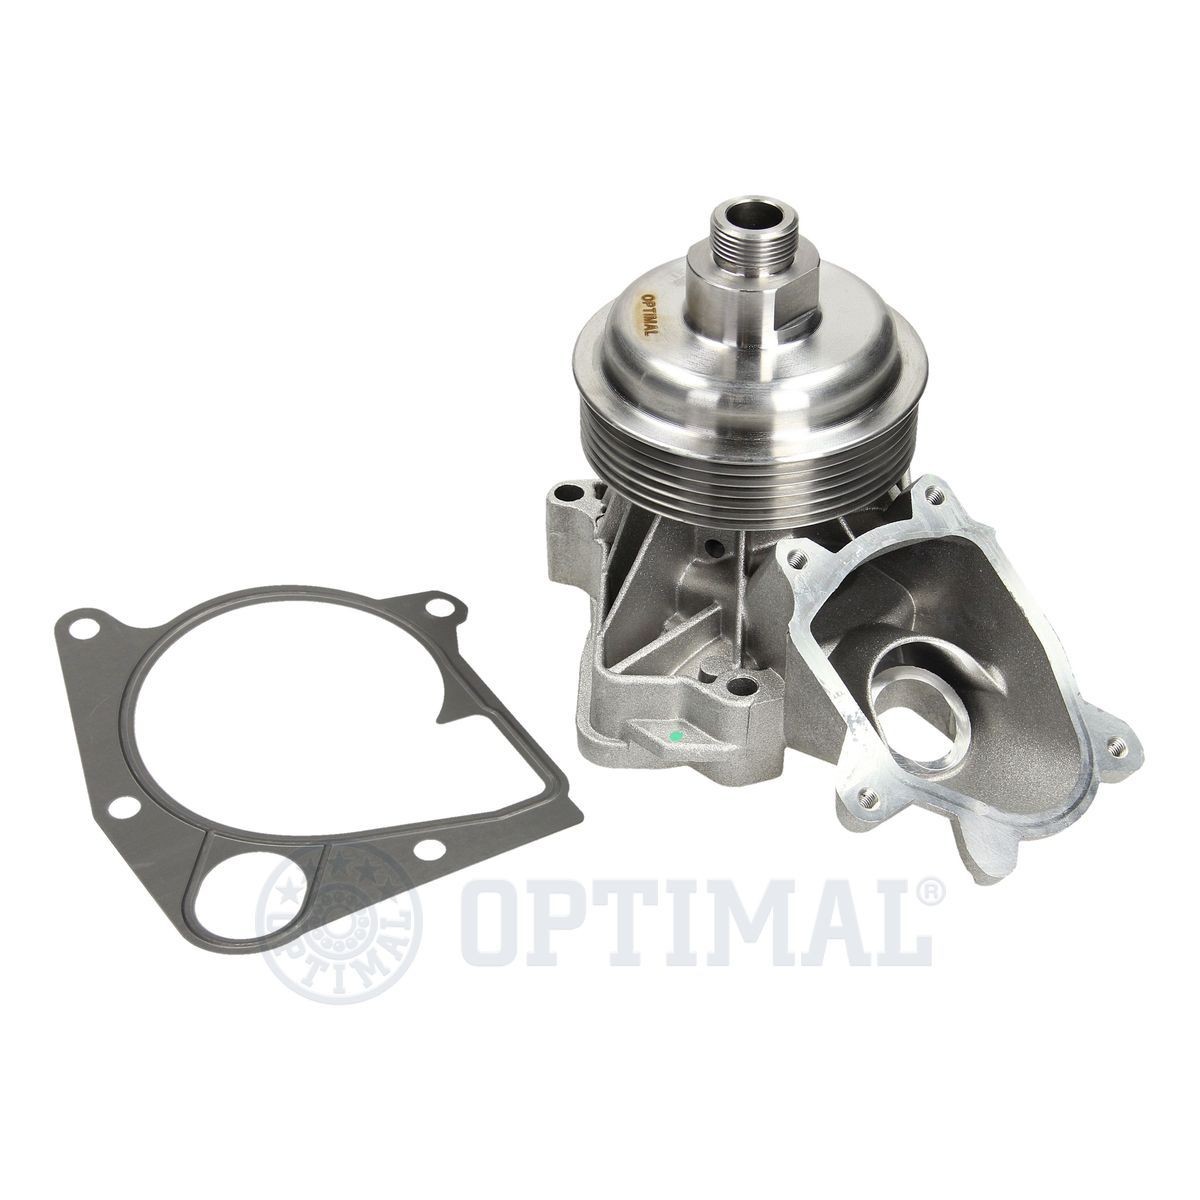 OPTIMAL with seal, Mechanical Water pumps AQ-2105 buy